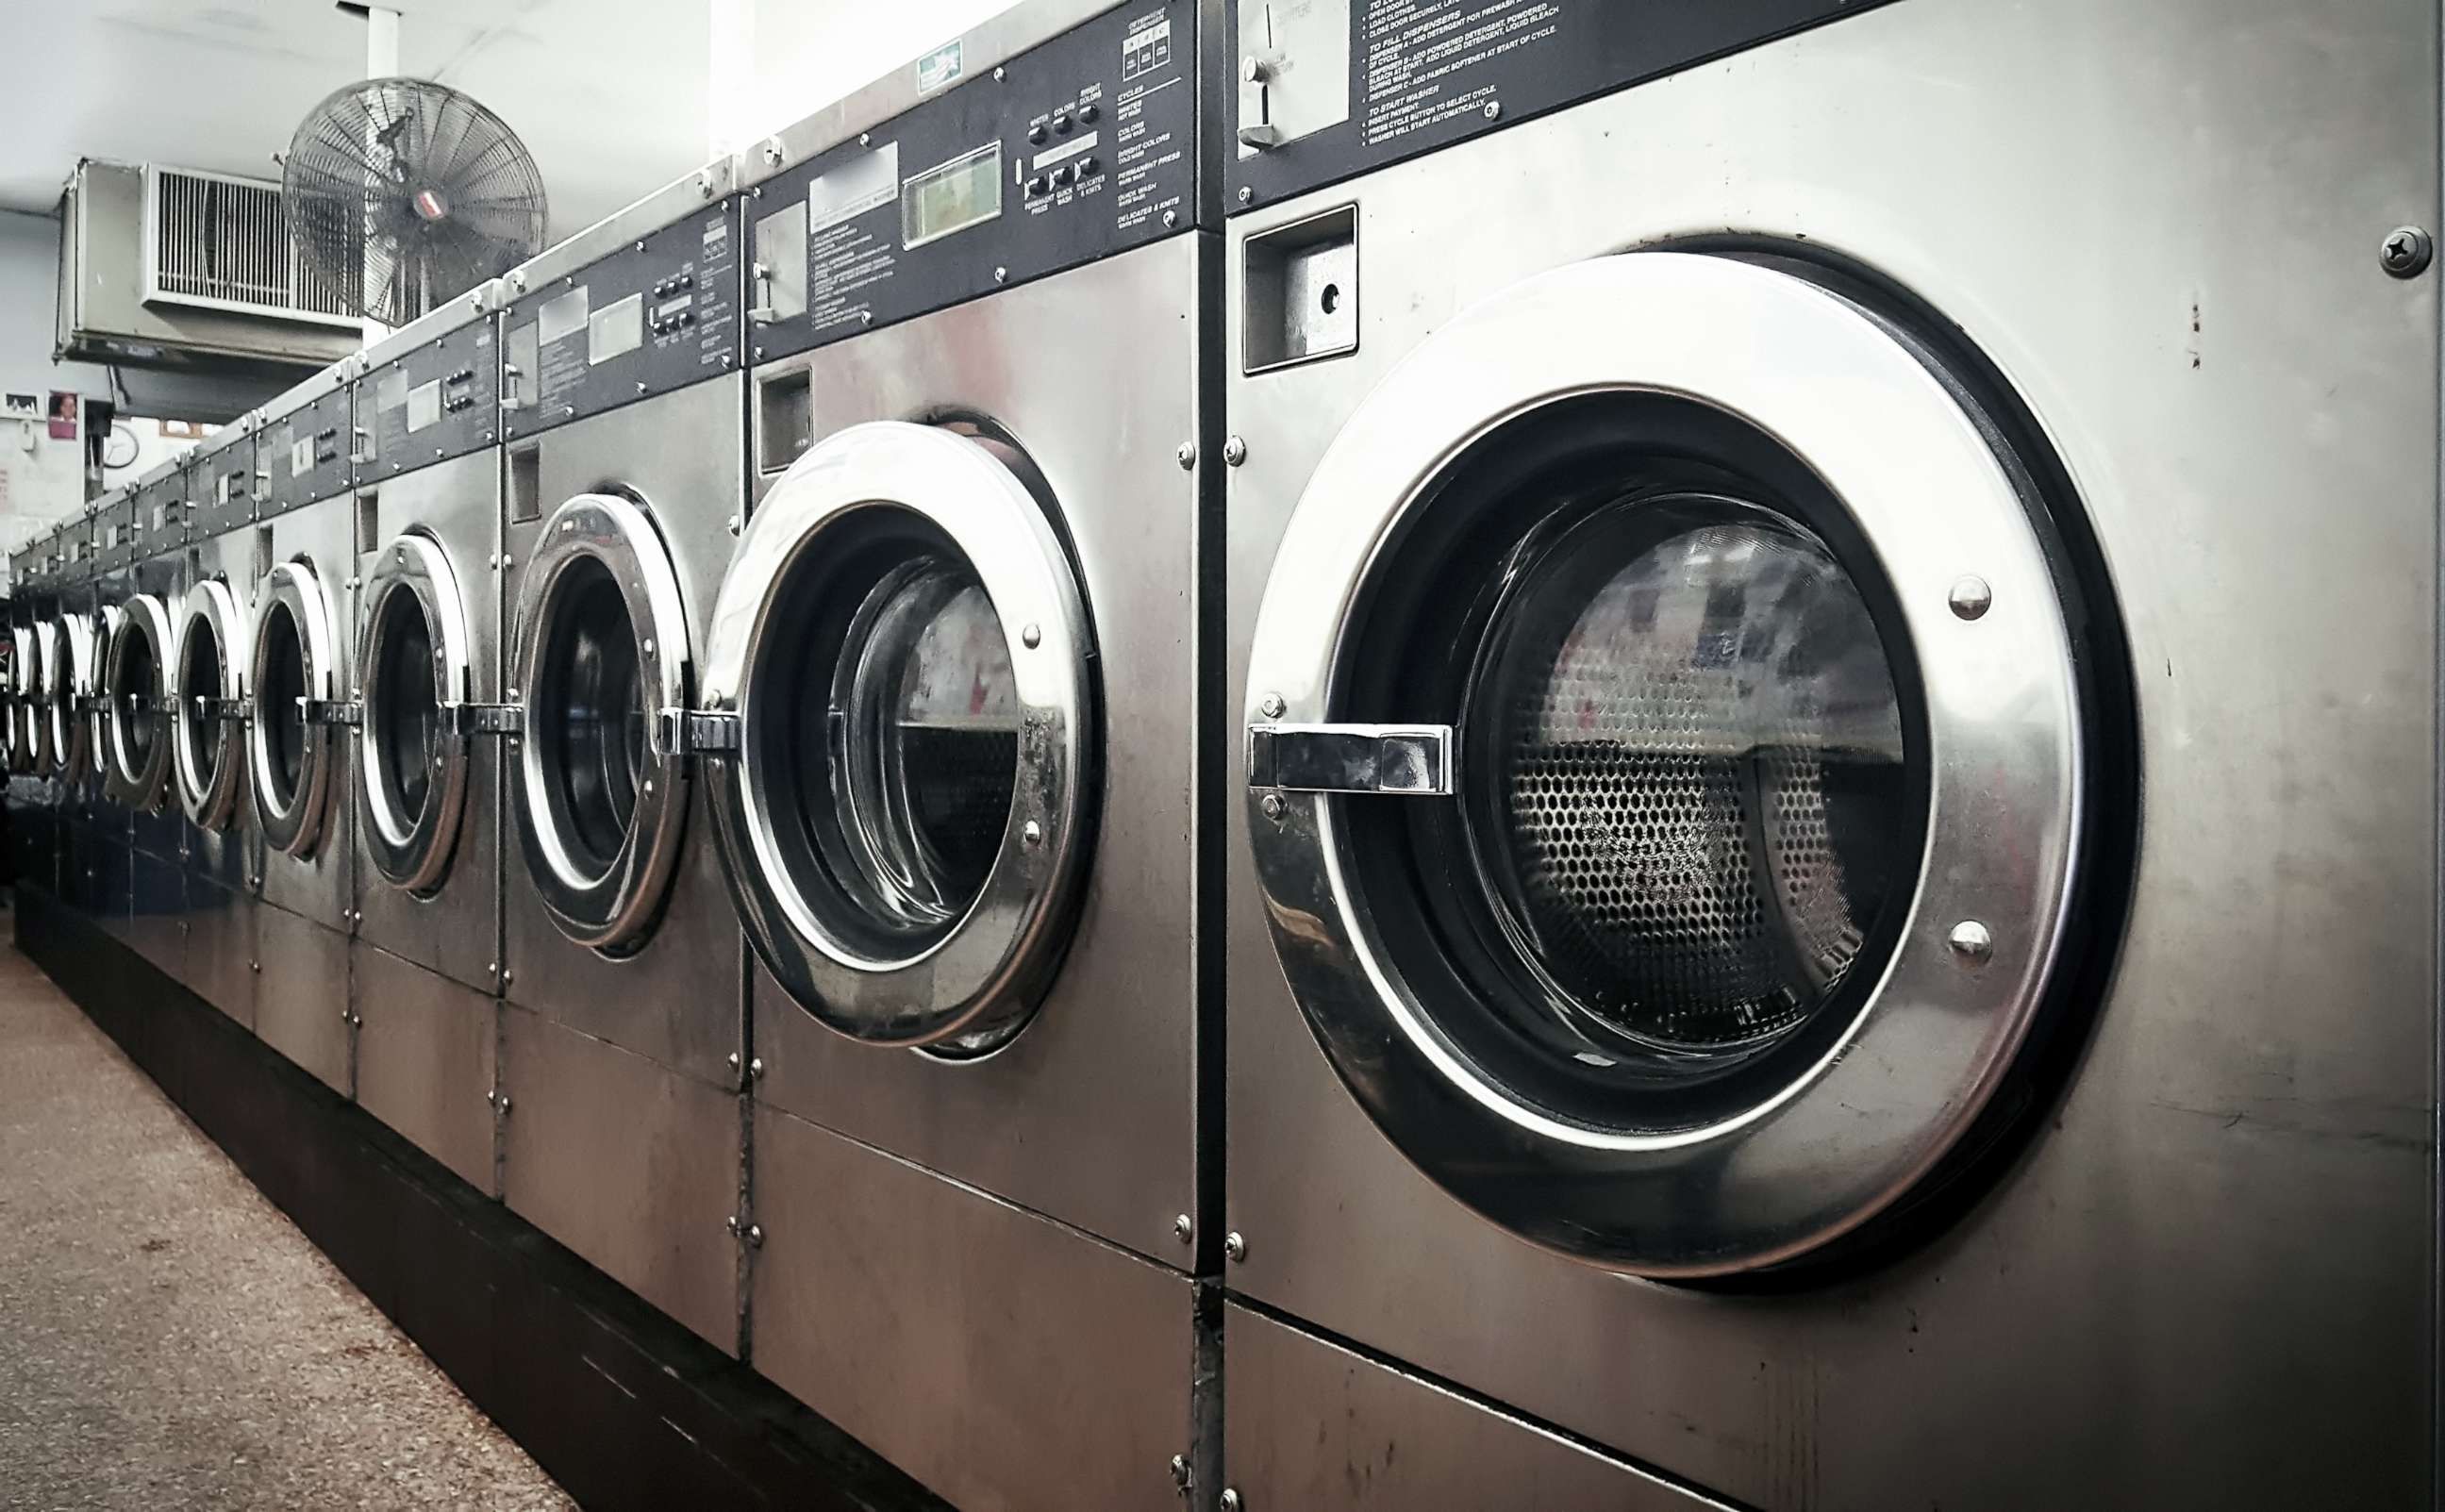 PHOTO: A row of washers at a laundromat in New York City.